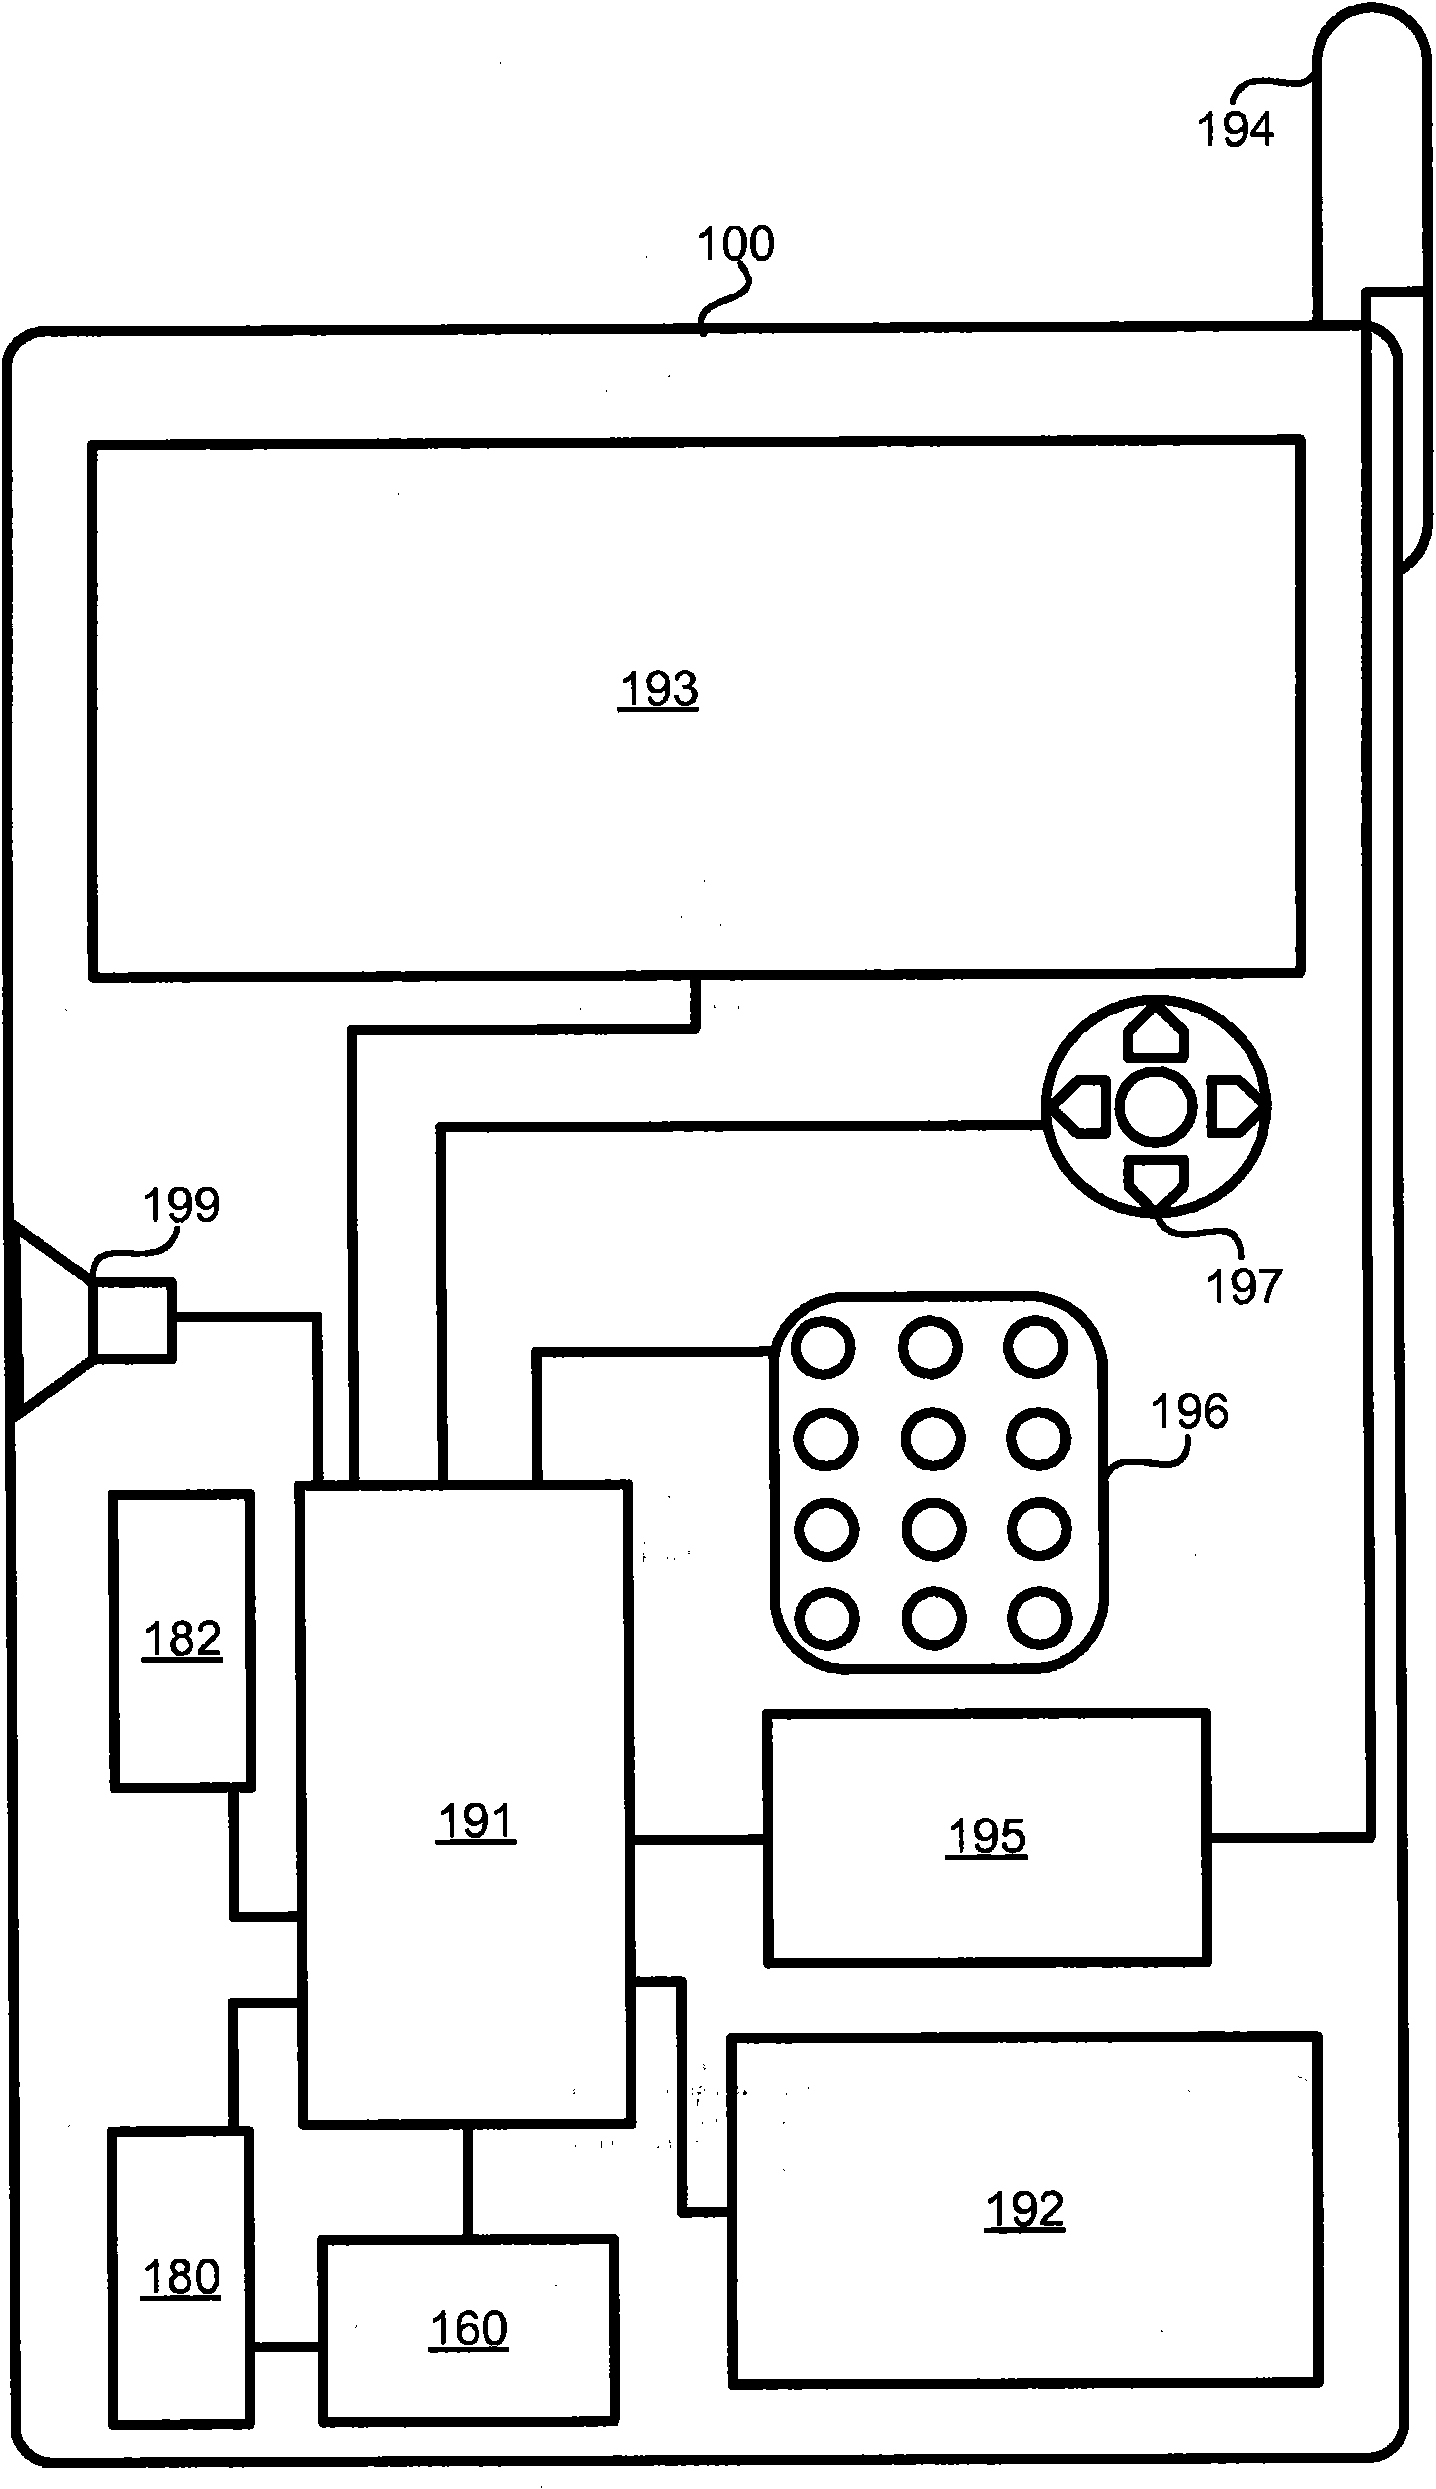 Methods and apparatus for communicating by vibrating or moving mobile devices